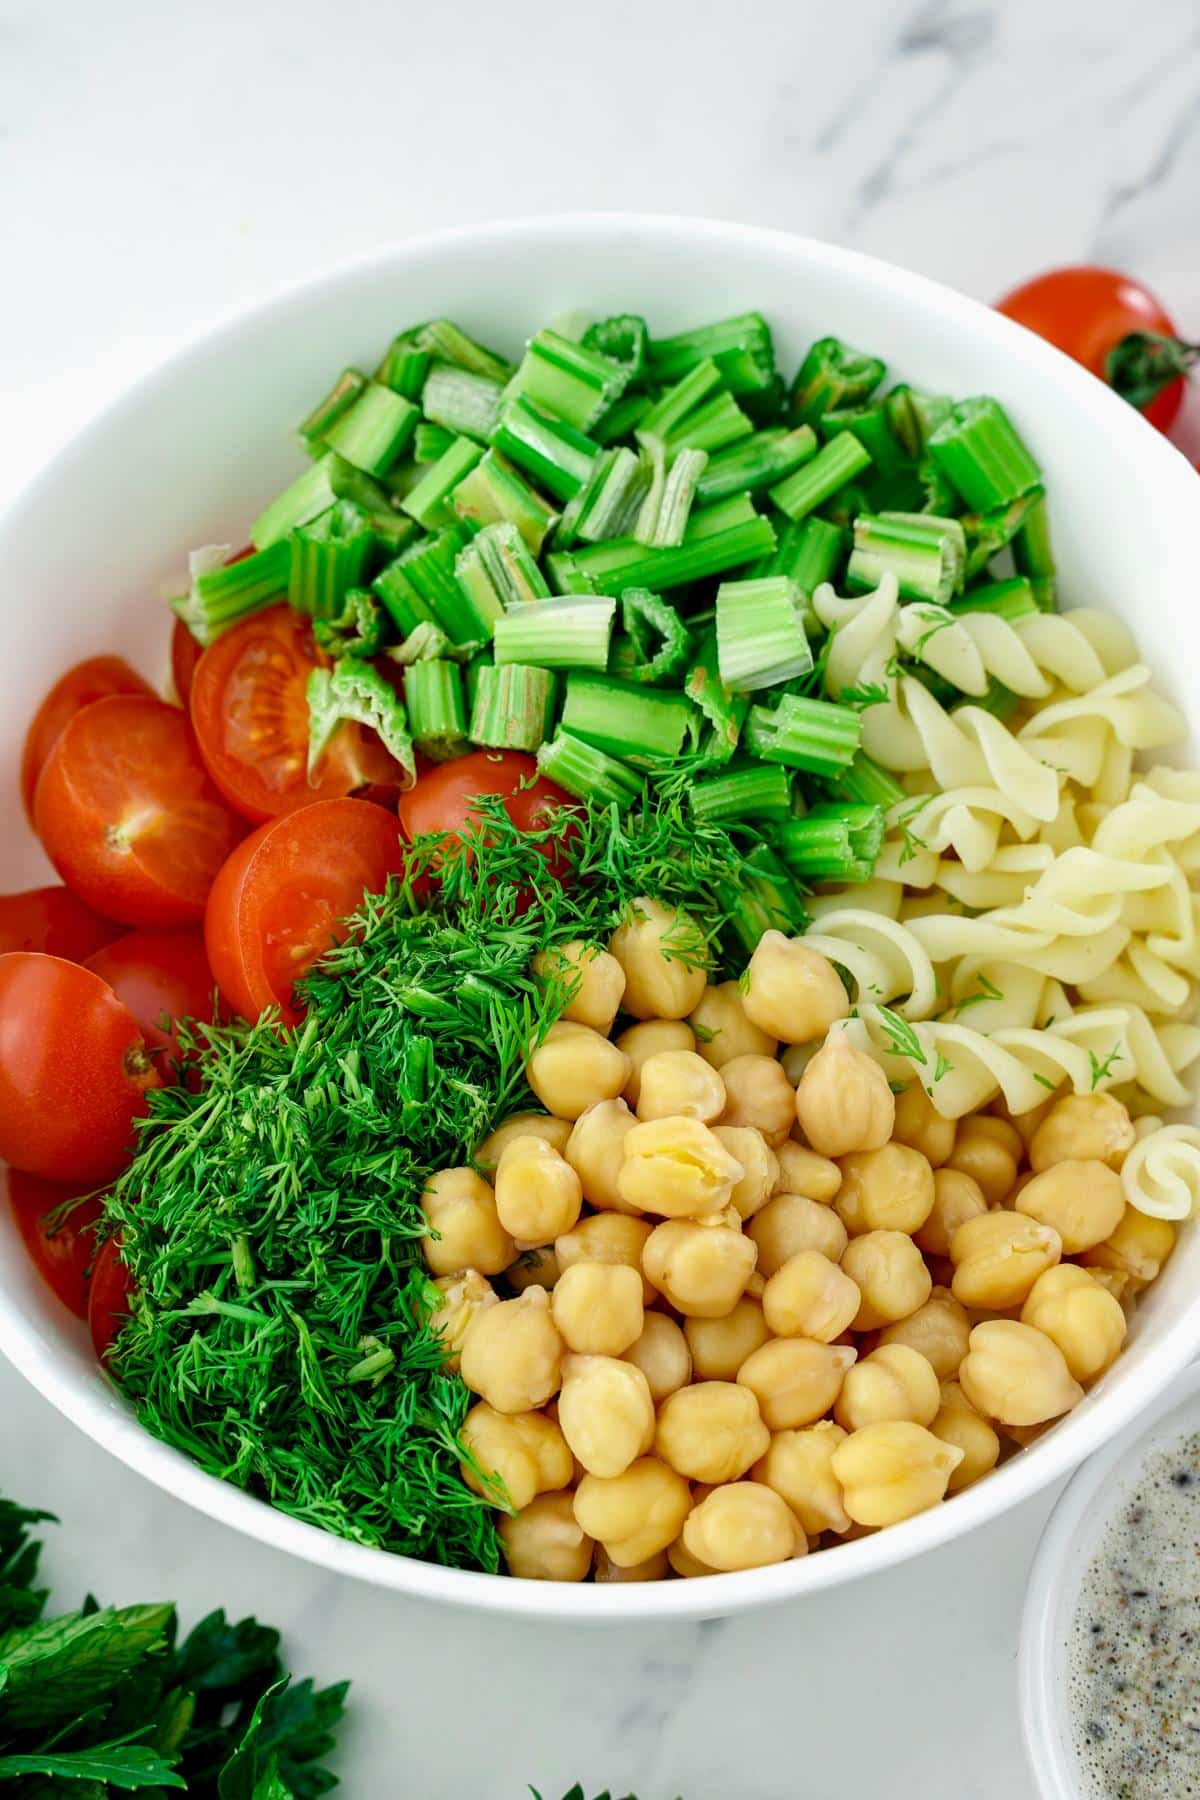 celery, chickpeas, tomato, pasta, and herbs in large white bowl